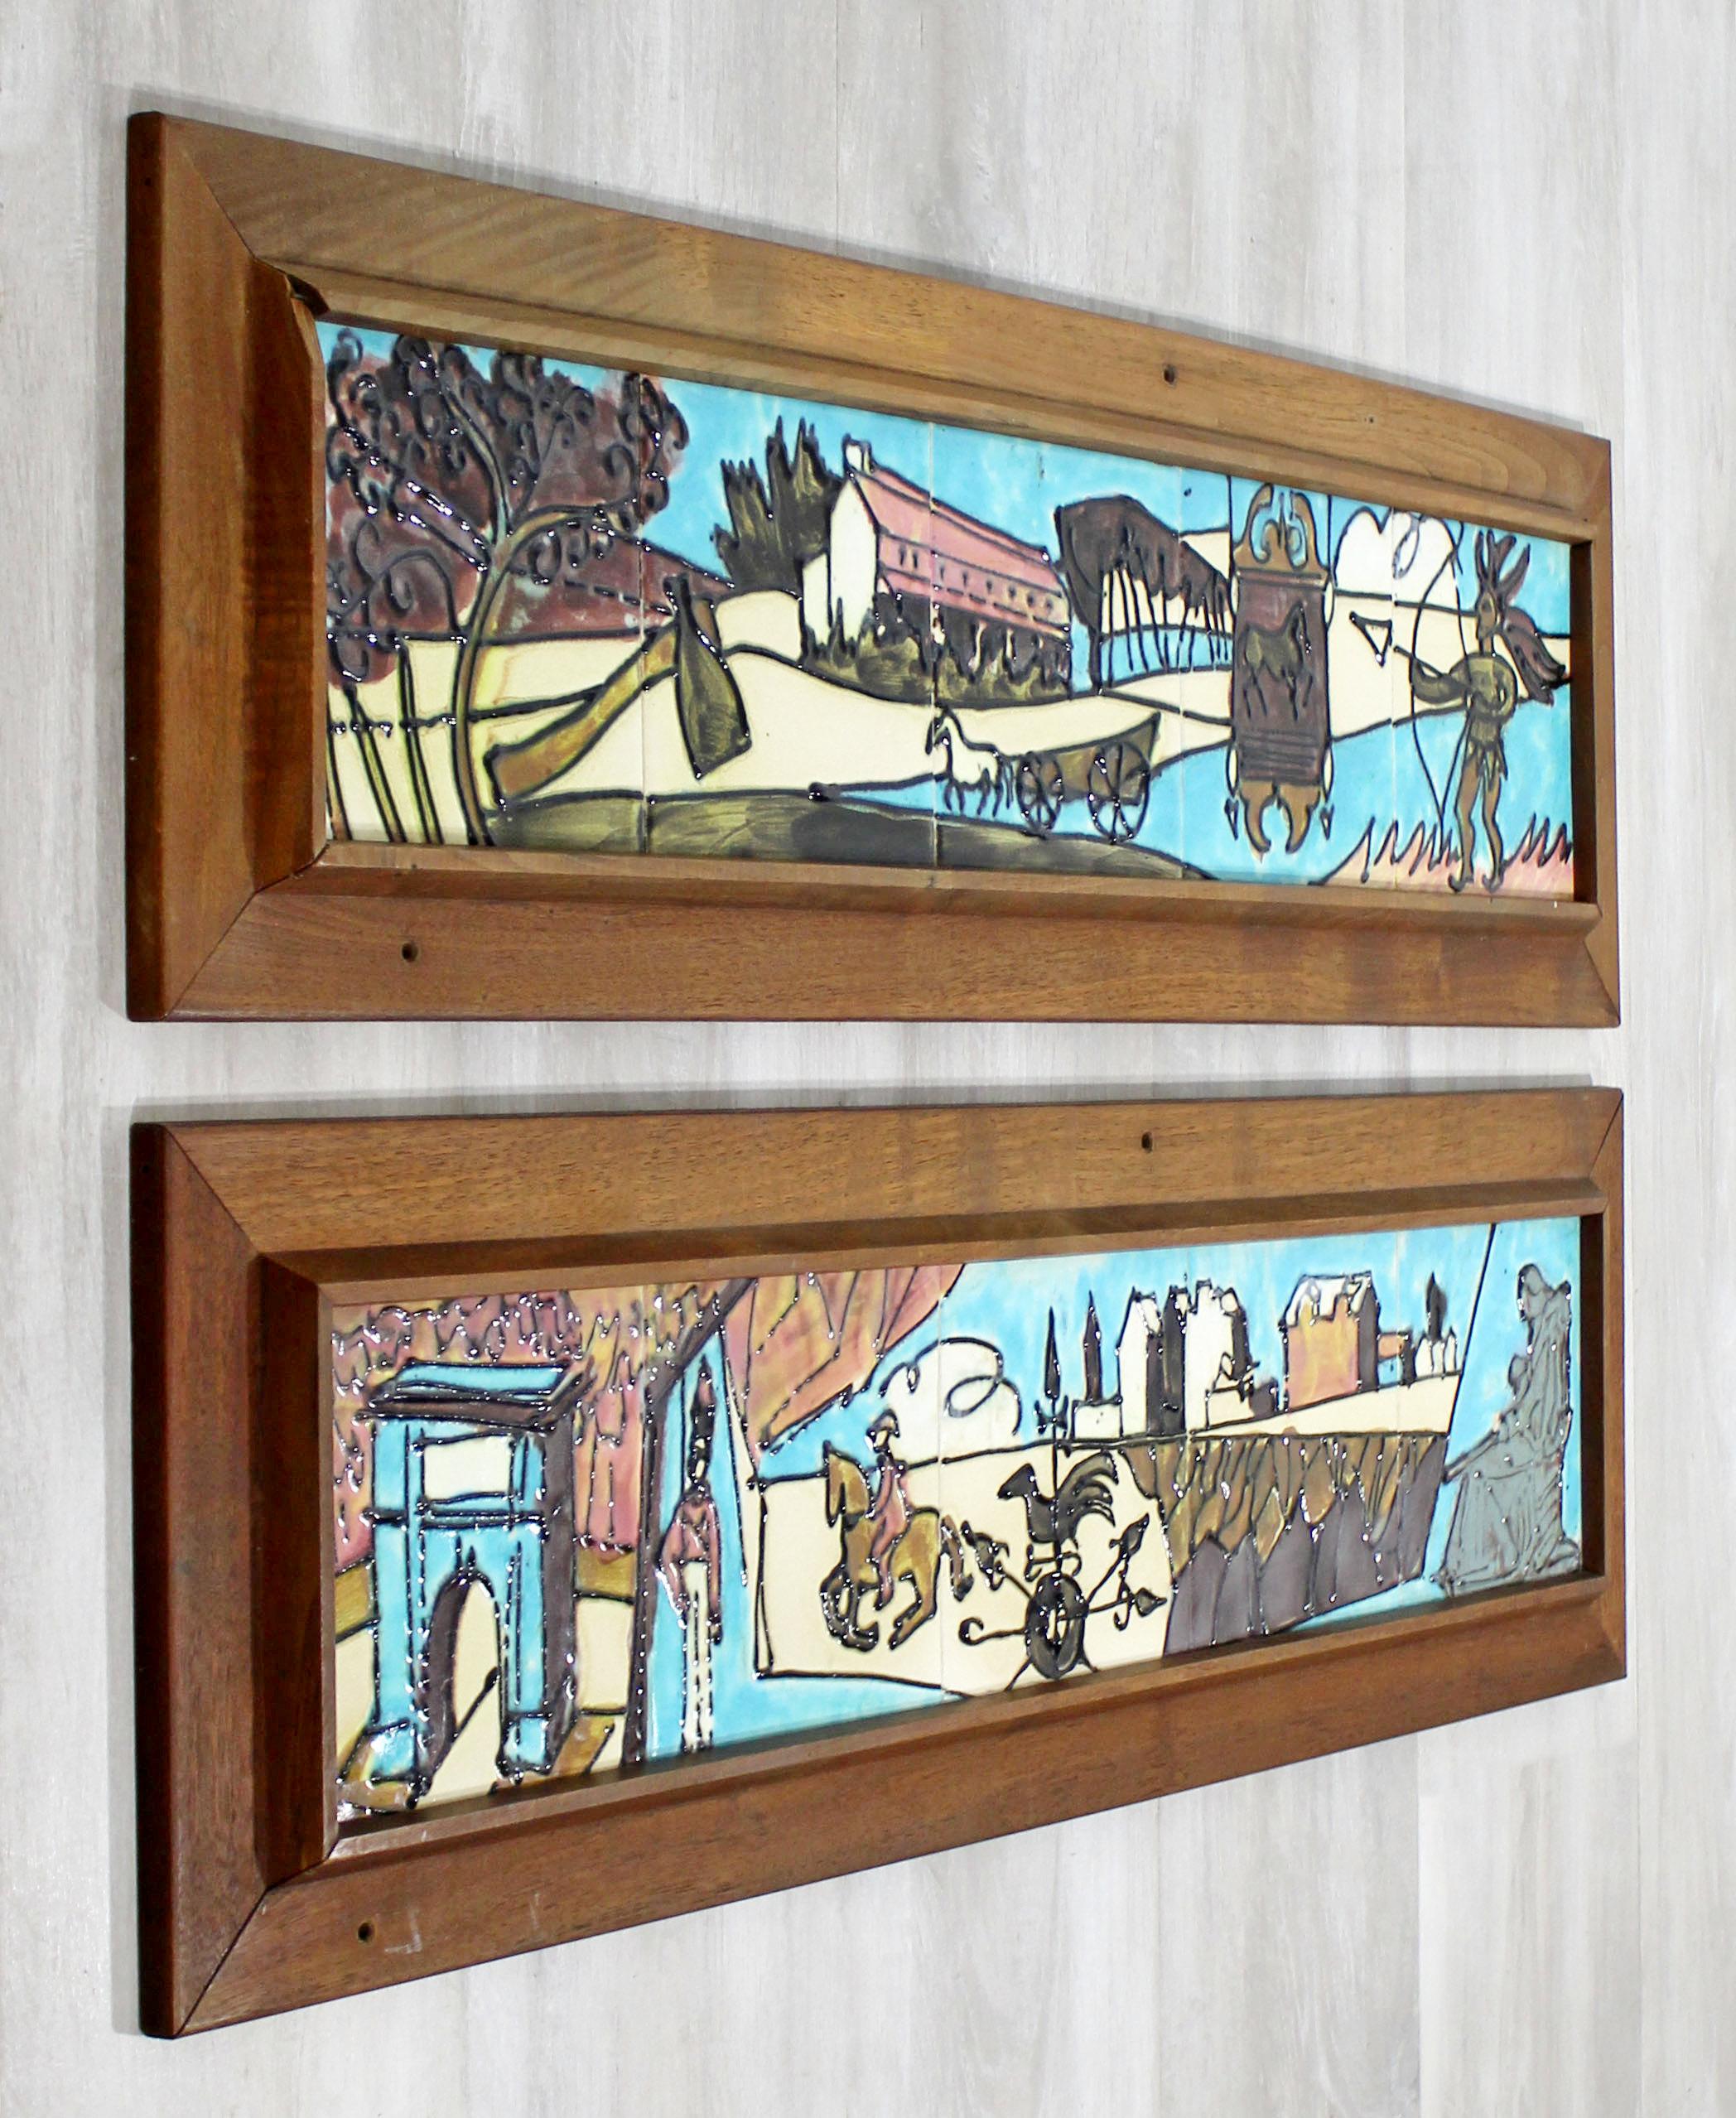 For your consideration is a beautiful pair of framed, Harris Strong, Americana, ceramic hanging wall sculptures, circa 1960s. In excellent condition. The dimensions of the frames are 34